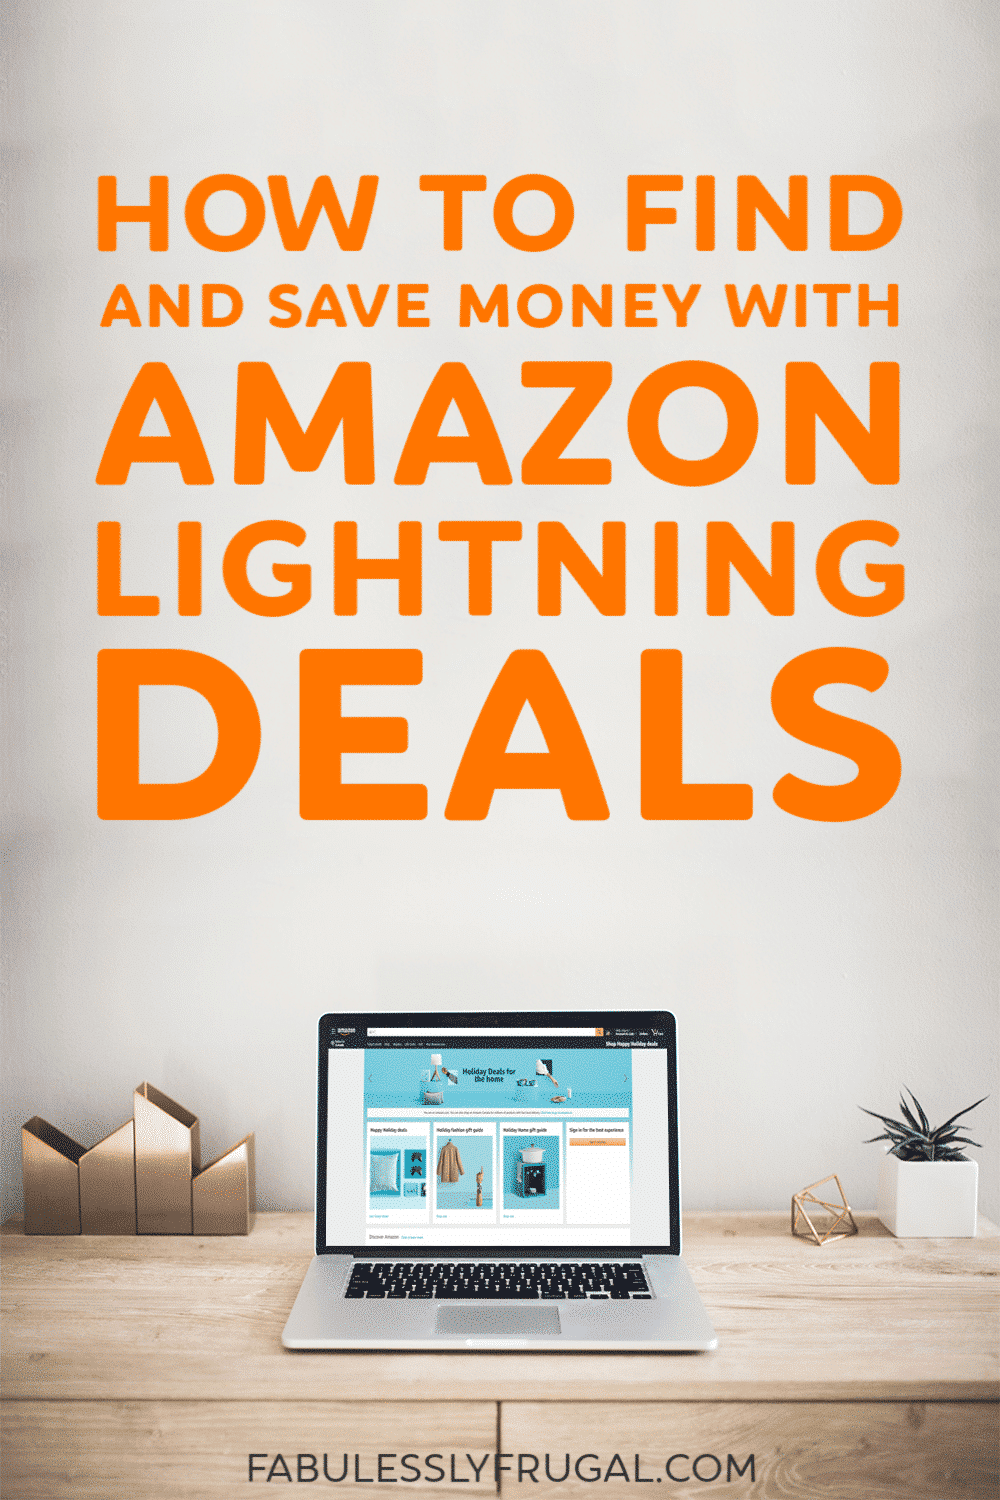 https://fabulesslyfrugal.com/wp-content/uploads/2020/03/how-to-find-amazon-lightning-deals.png